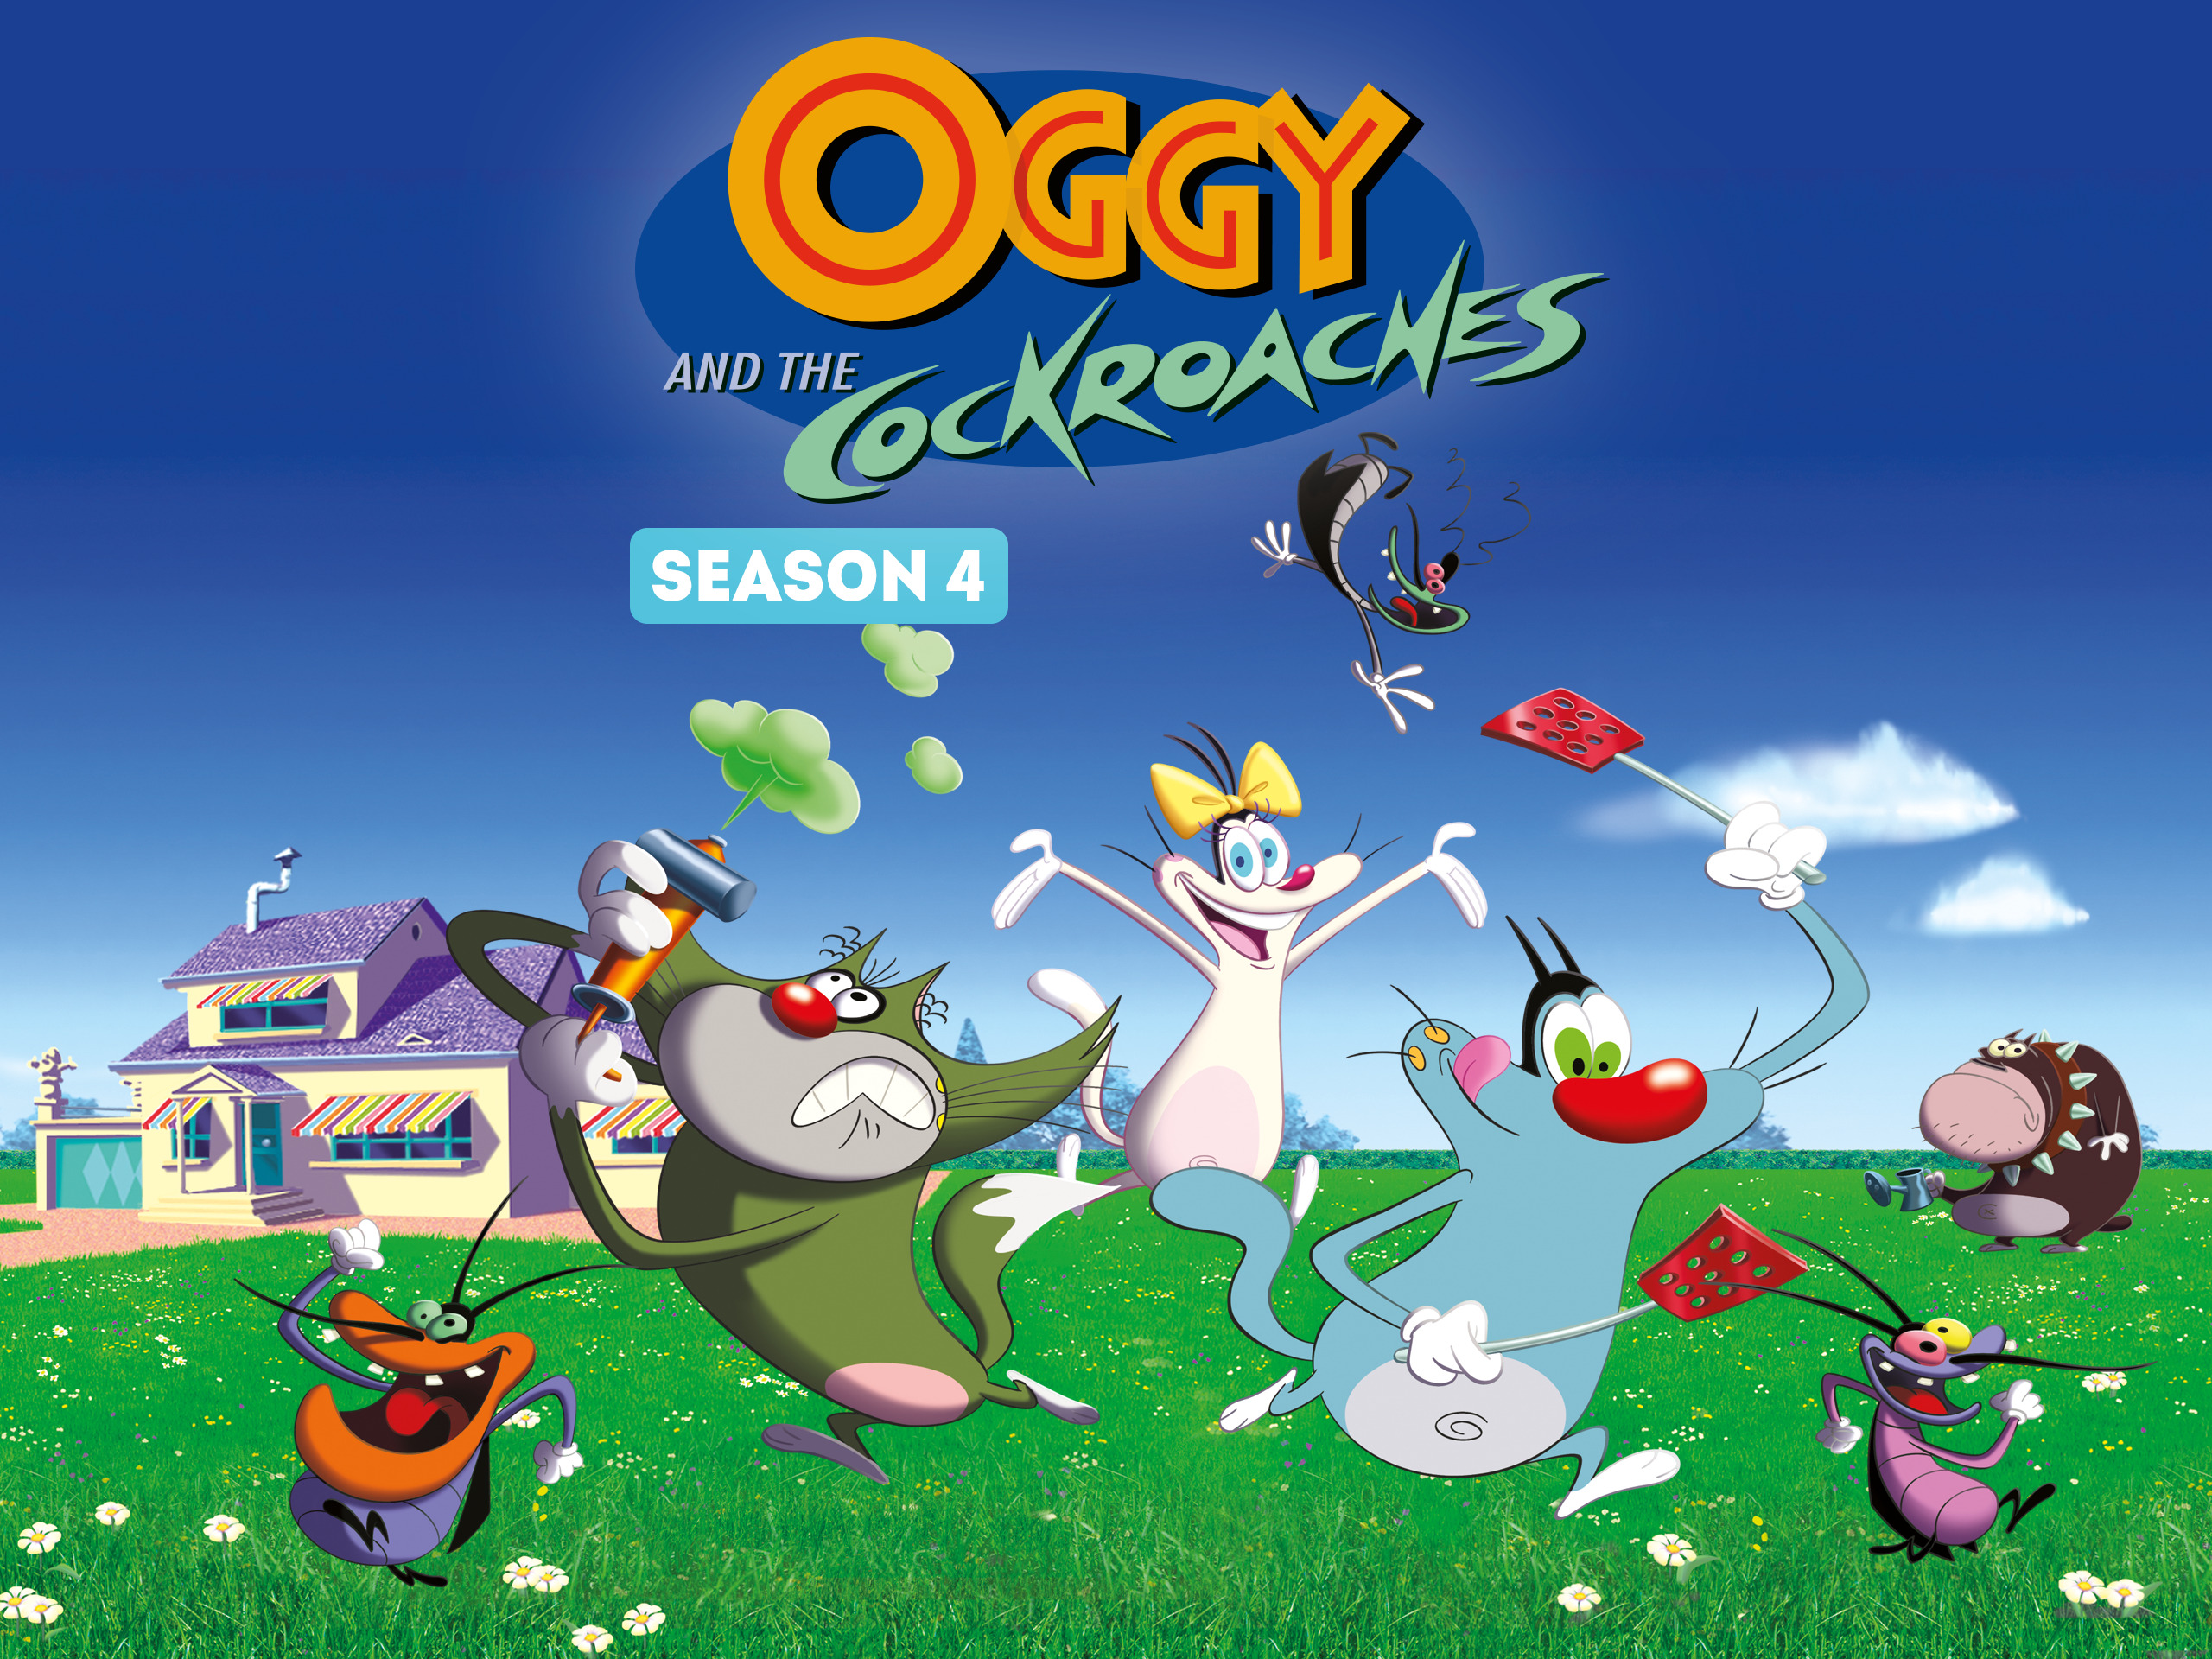 oggy and the cockroaches oggy